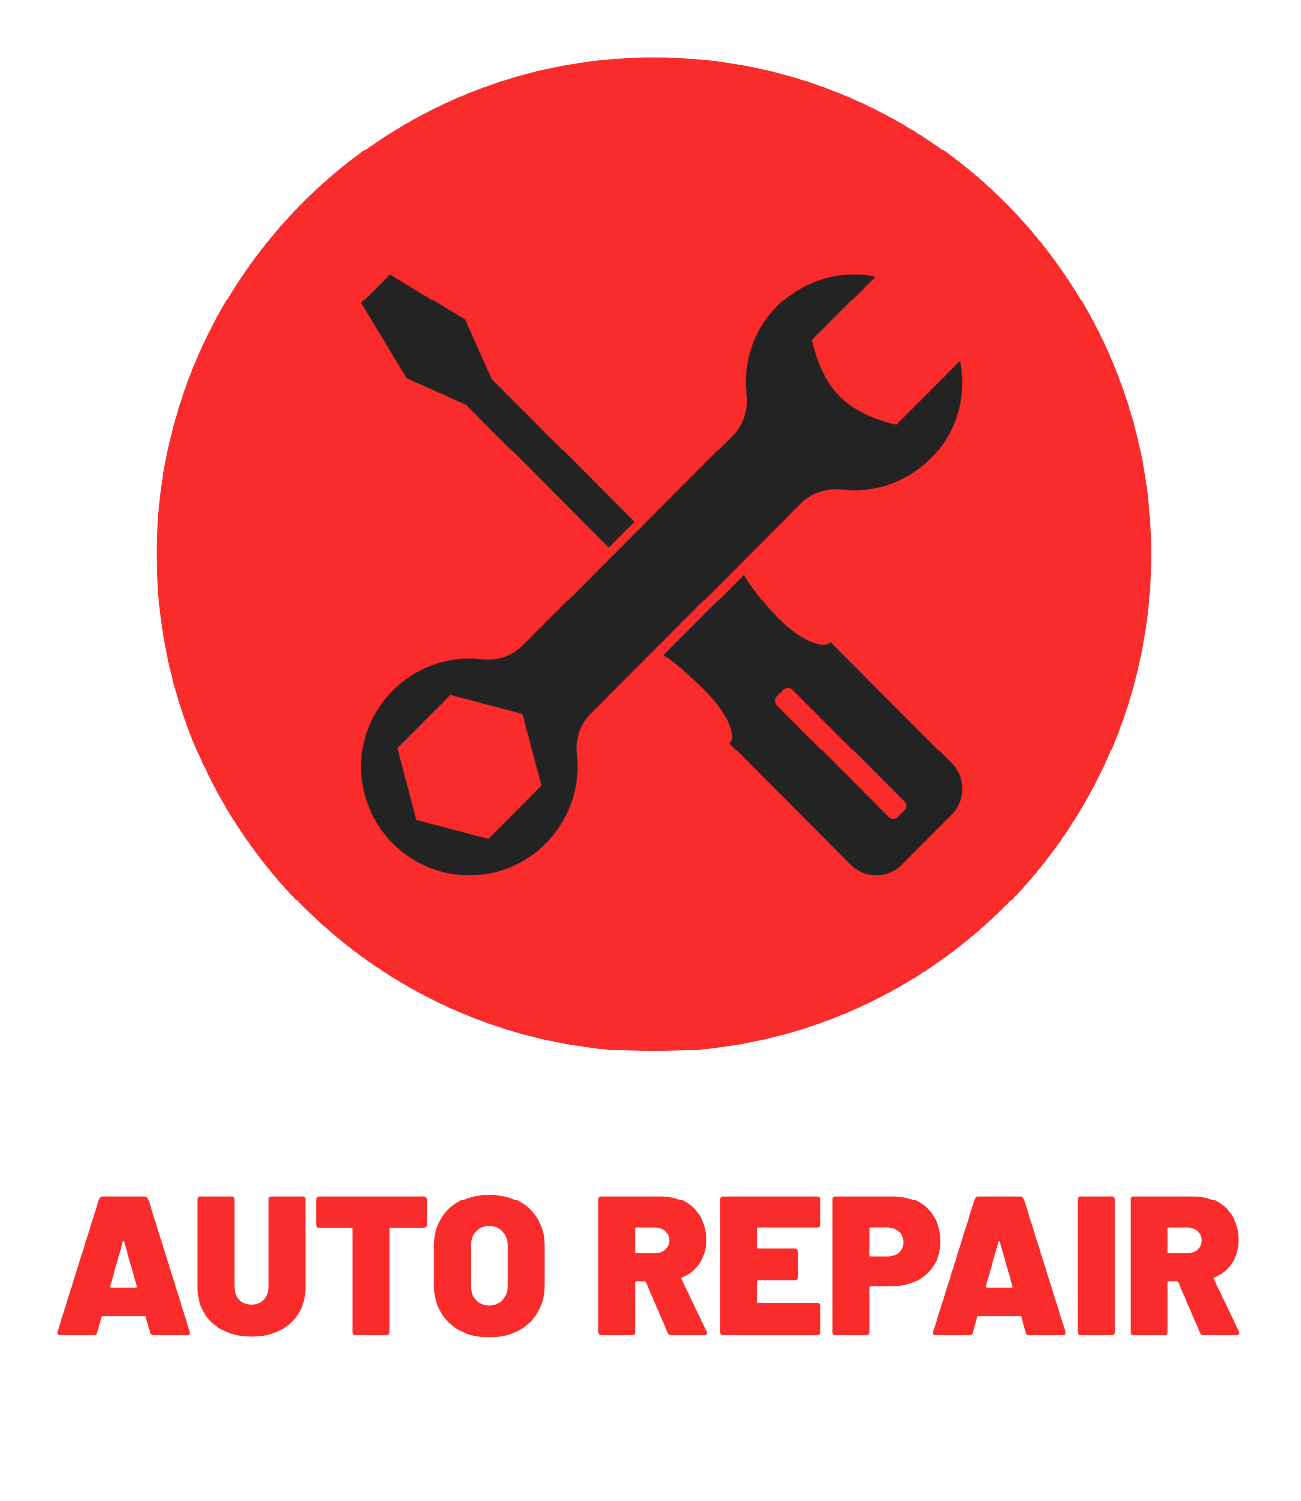 Learn more about auto repair services